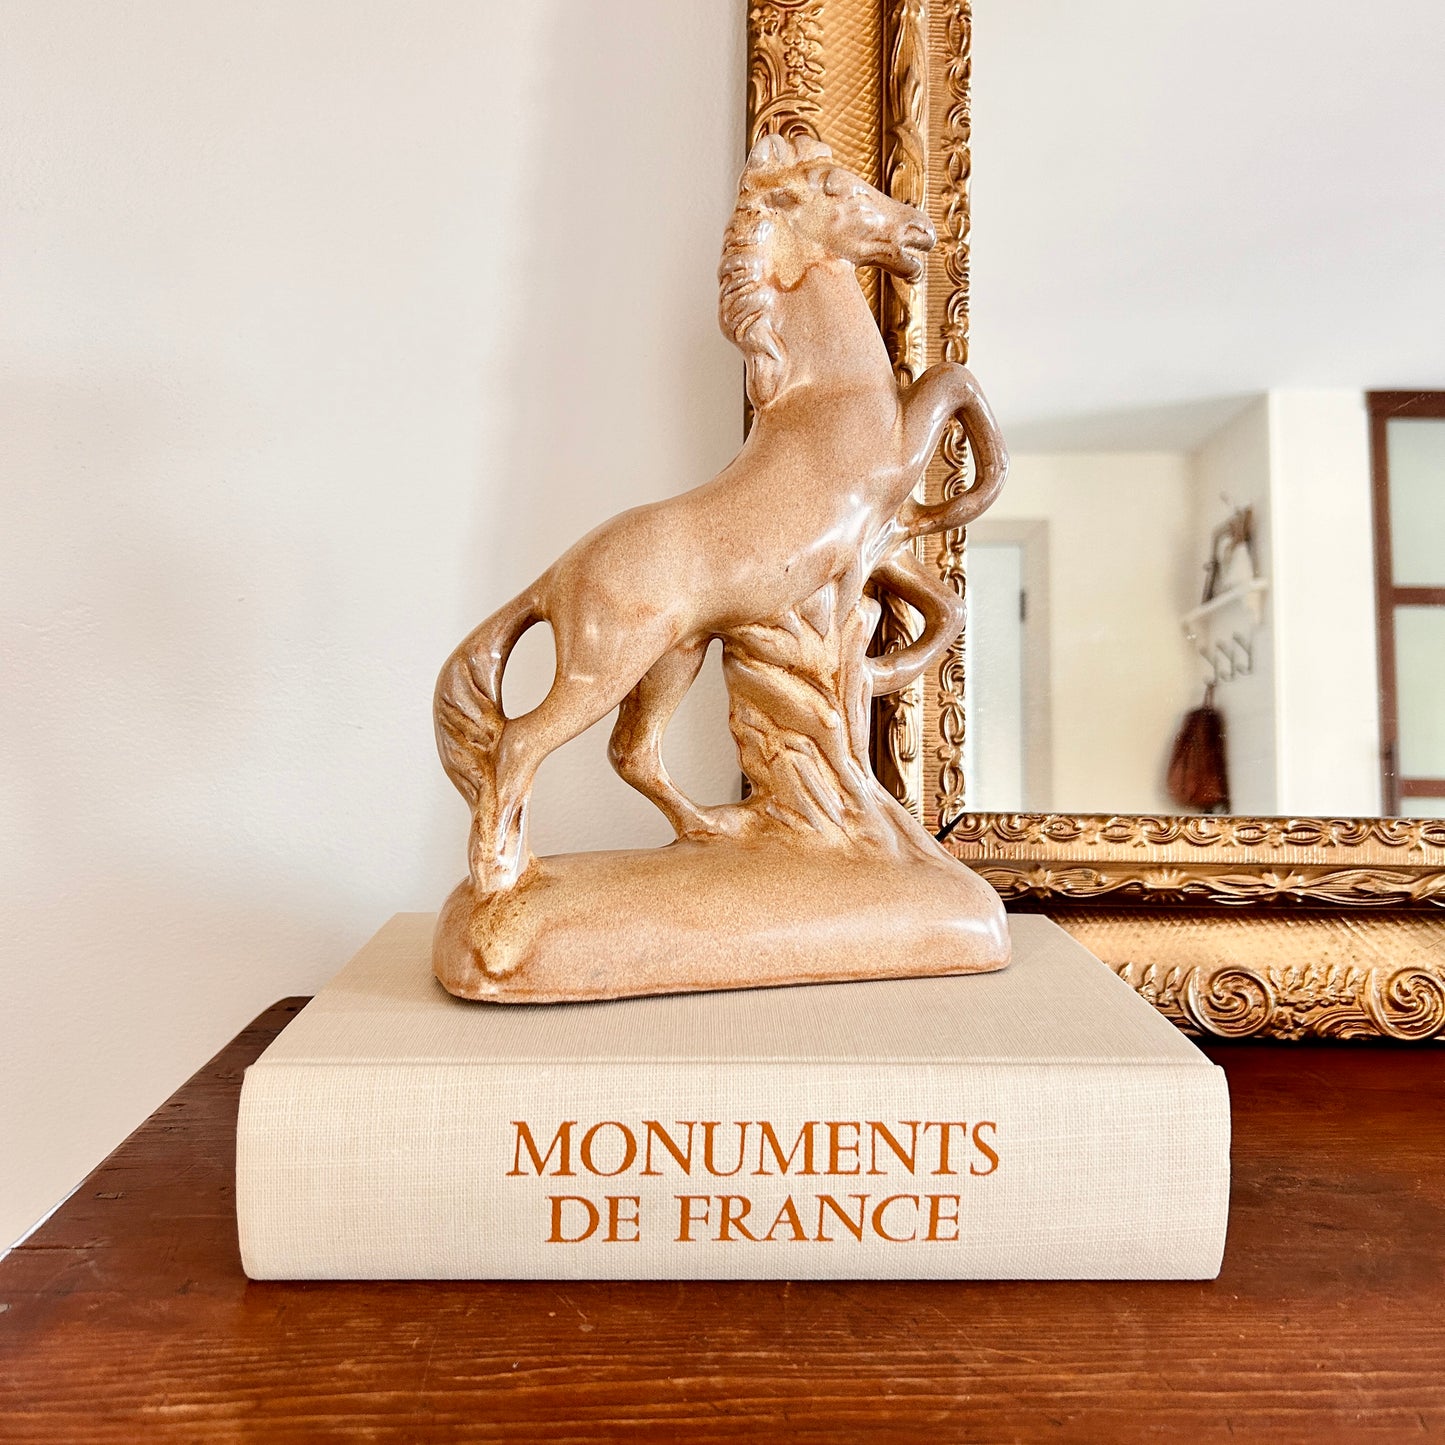 Book - To know the monuments of France